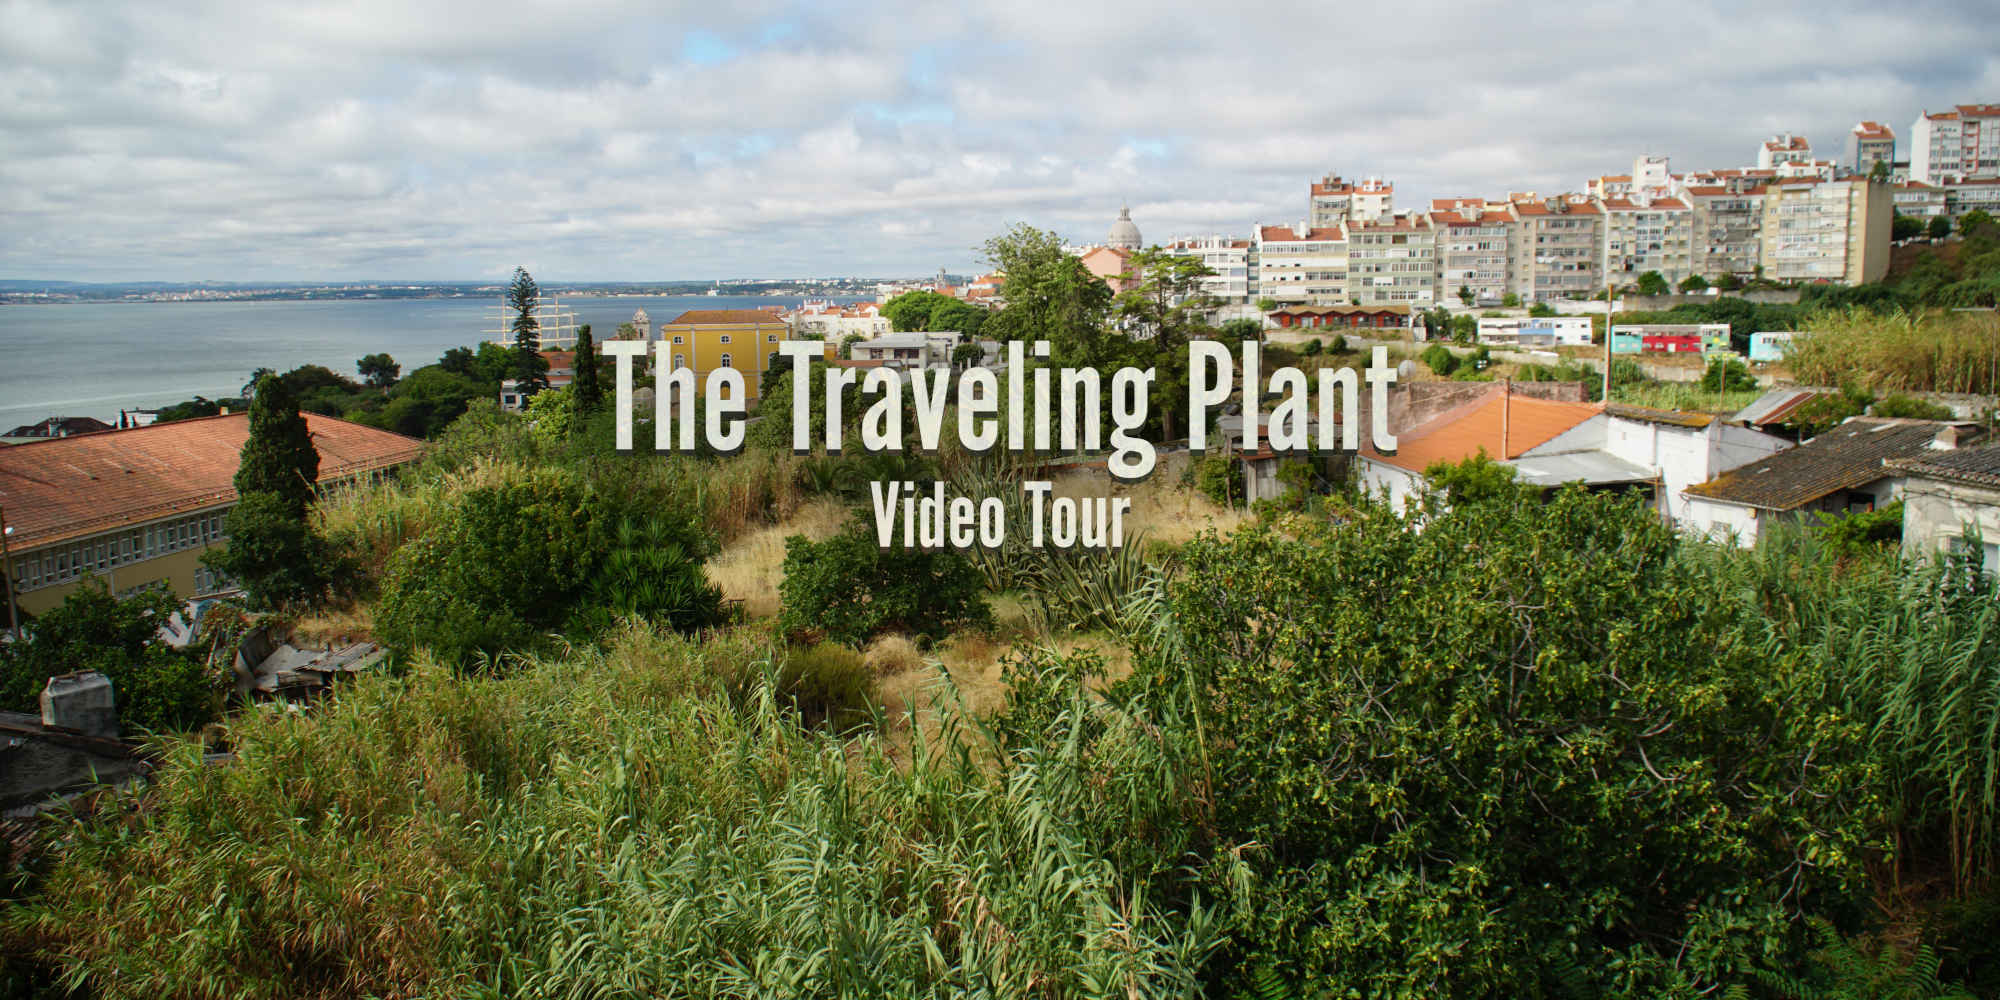 The Traveling Plan Project